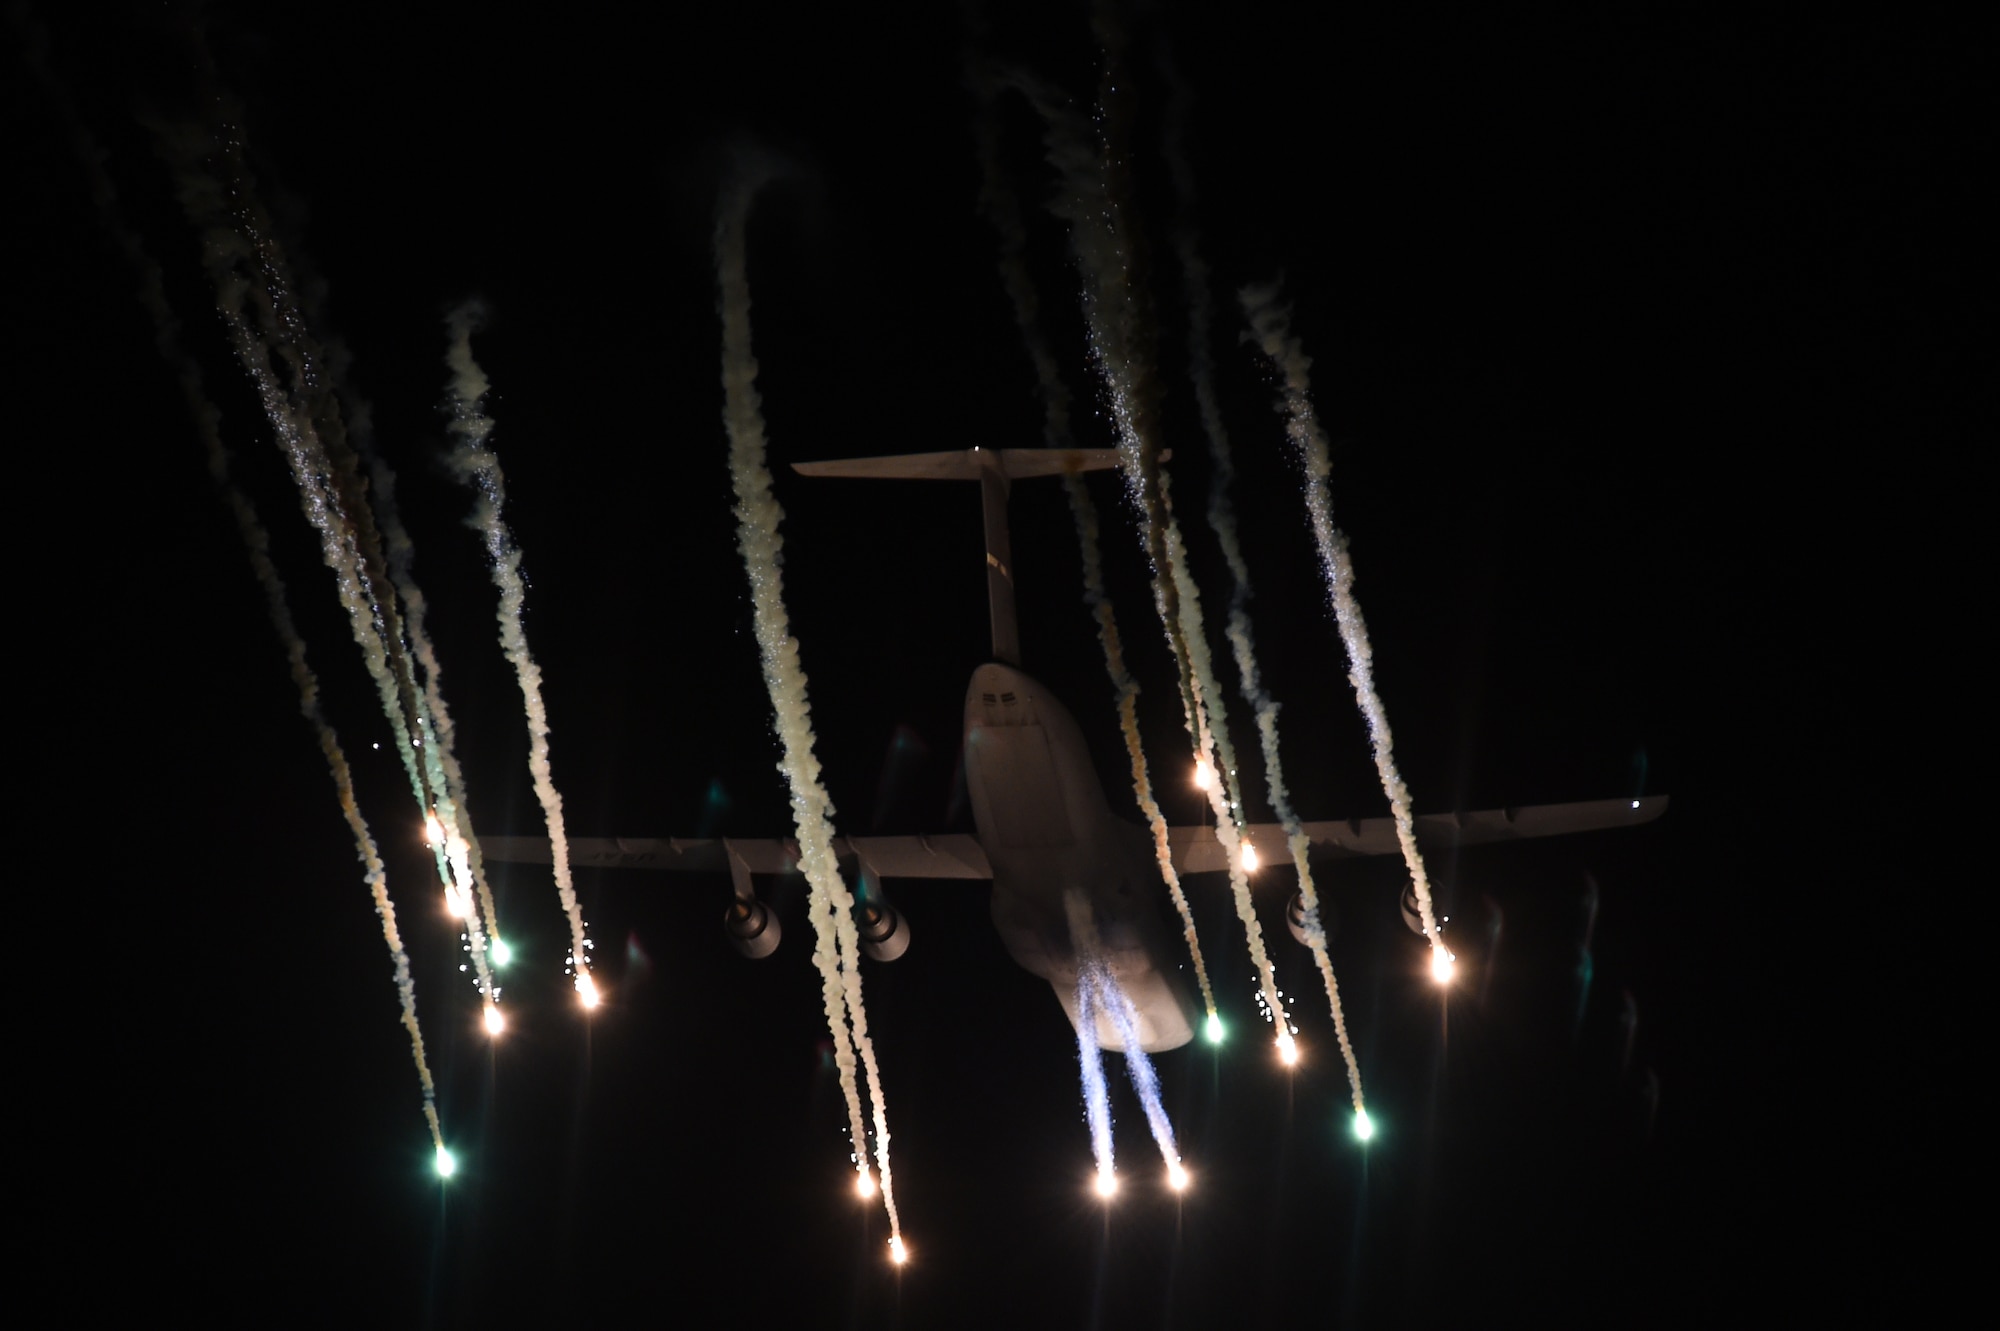 A McChord C-17 Globemaster III ejects flares over the test range at Eglin Air Force Base, Fla., March 4, 2016. The C-17 Aircrew from Joint Base Lewis-McChord, Wash., and the C-5 aircrew from Travis AFB, Calif., flew to Eglin to test the aircraft defense systems as part of Air Mobility Command’s flare effectiveness testing with Georgia Tech Research Institute. The automated defense mechanism on the aircraft is only 26 years old. (U.S. Air Force photo/Staff Sgt. Naomi Shipley)